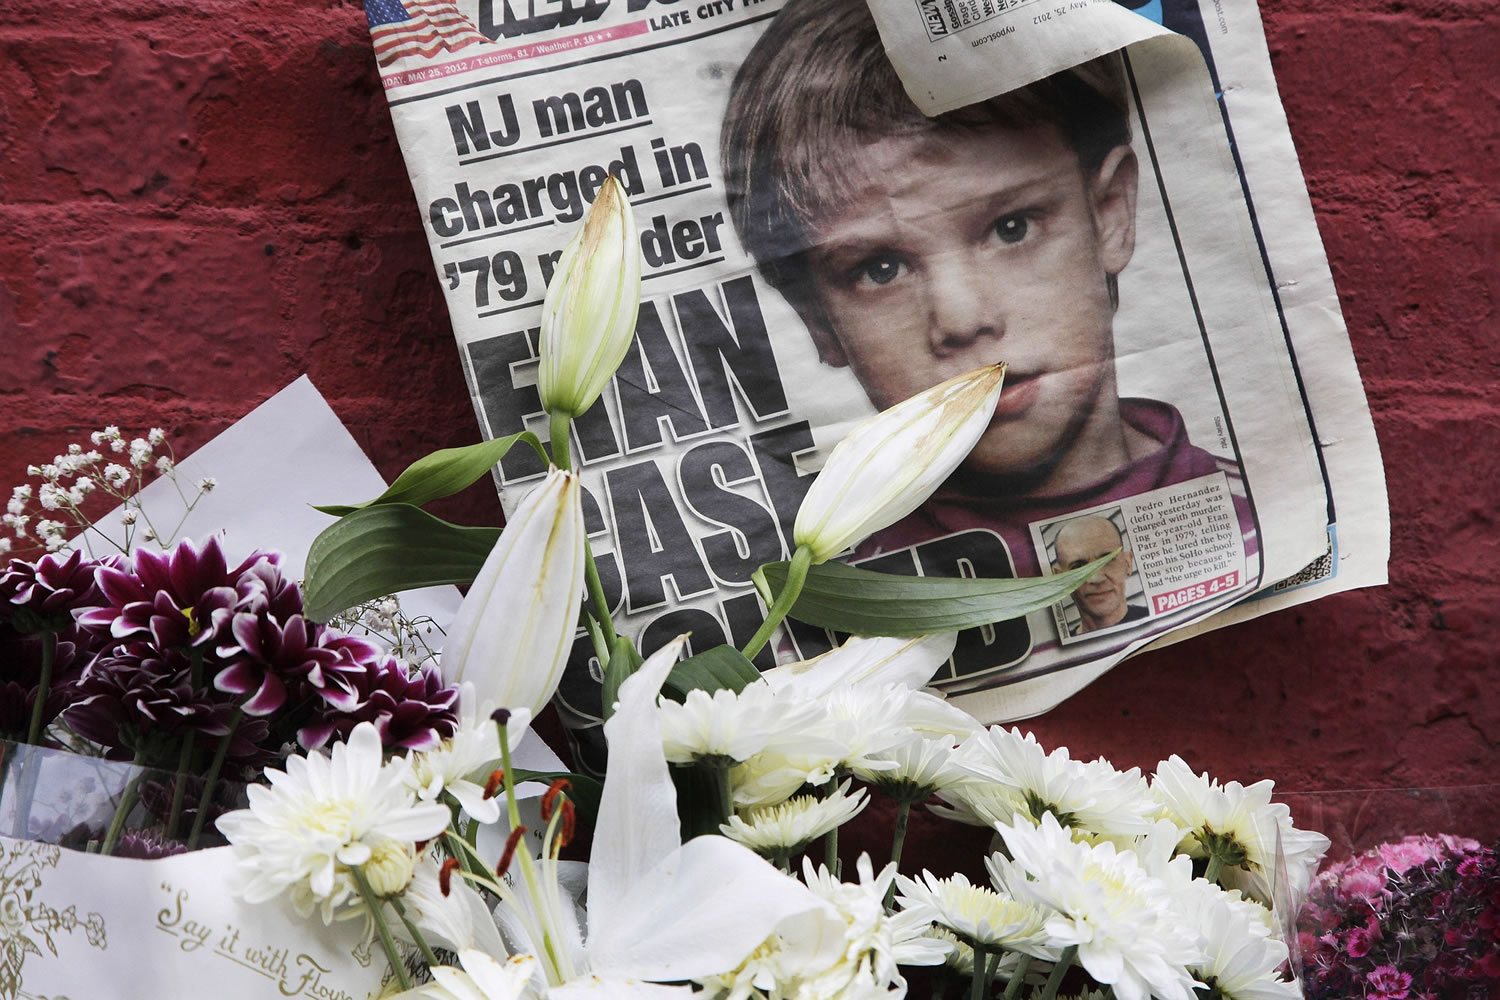 A newspaper with a photograph of Etan Patz sits May 28, 2012, at a makeshift memorial in the SoHo neighborhood of New York where Patz lived before his disappearance on May 25, 1979. The murder trial of Pedro Hernandez, the man accused in the child's disappearance, ended Friday with the jury hopelessly deadlocked after 18 days of deliberations, leaving unresolved a case that has haunted New York City for 36 years.